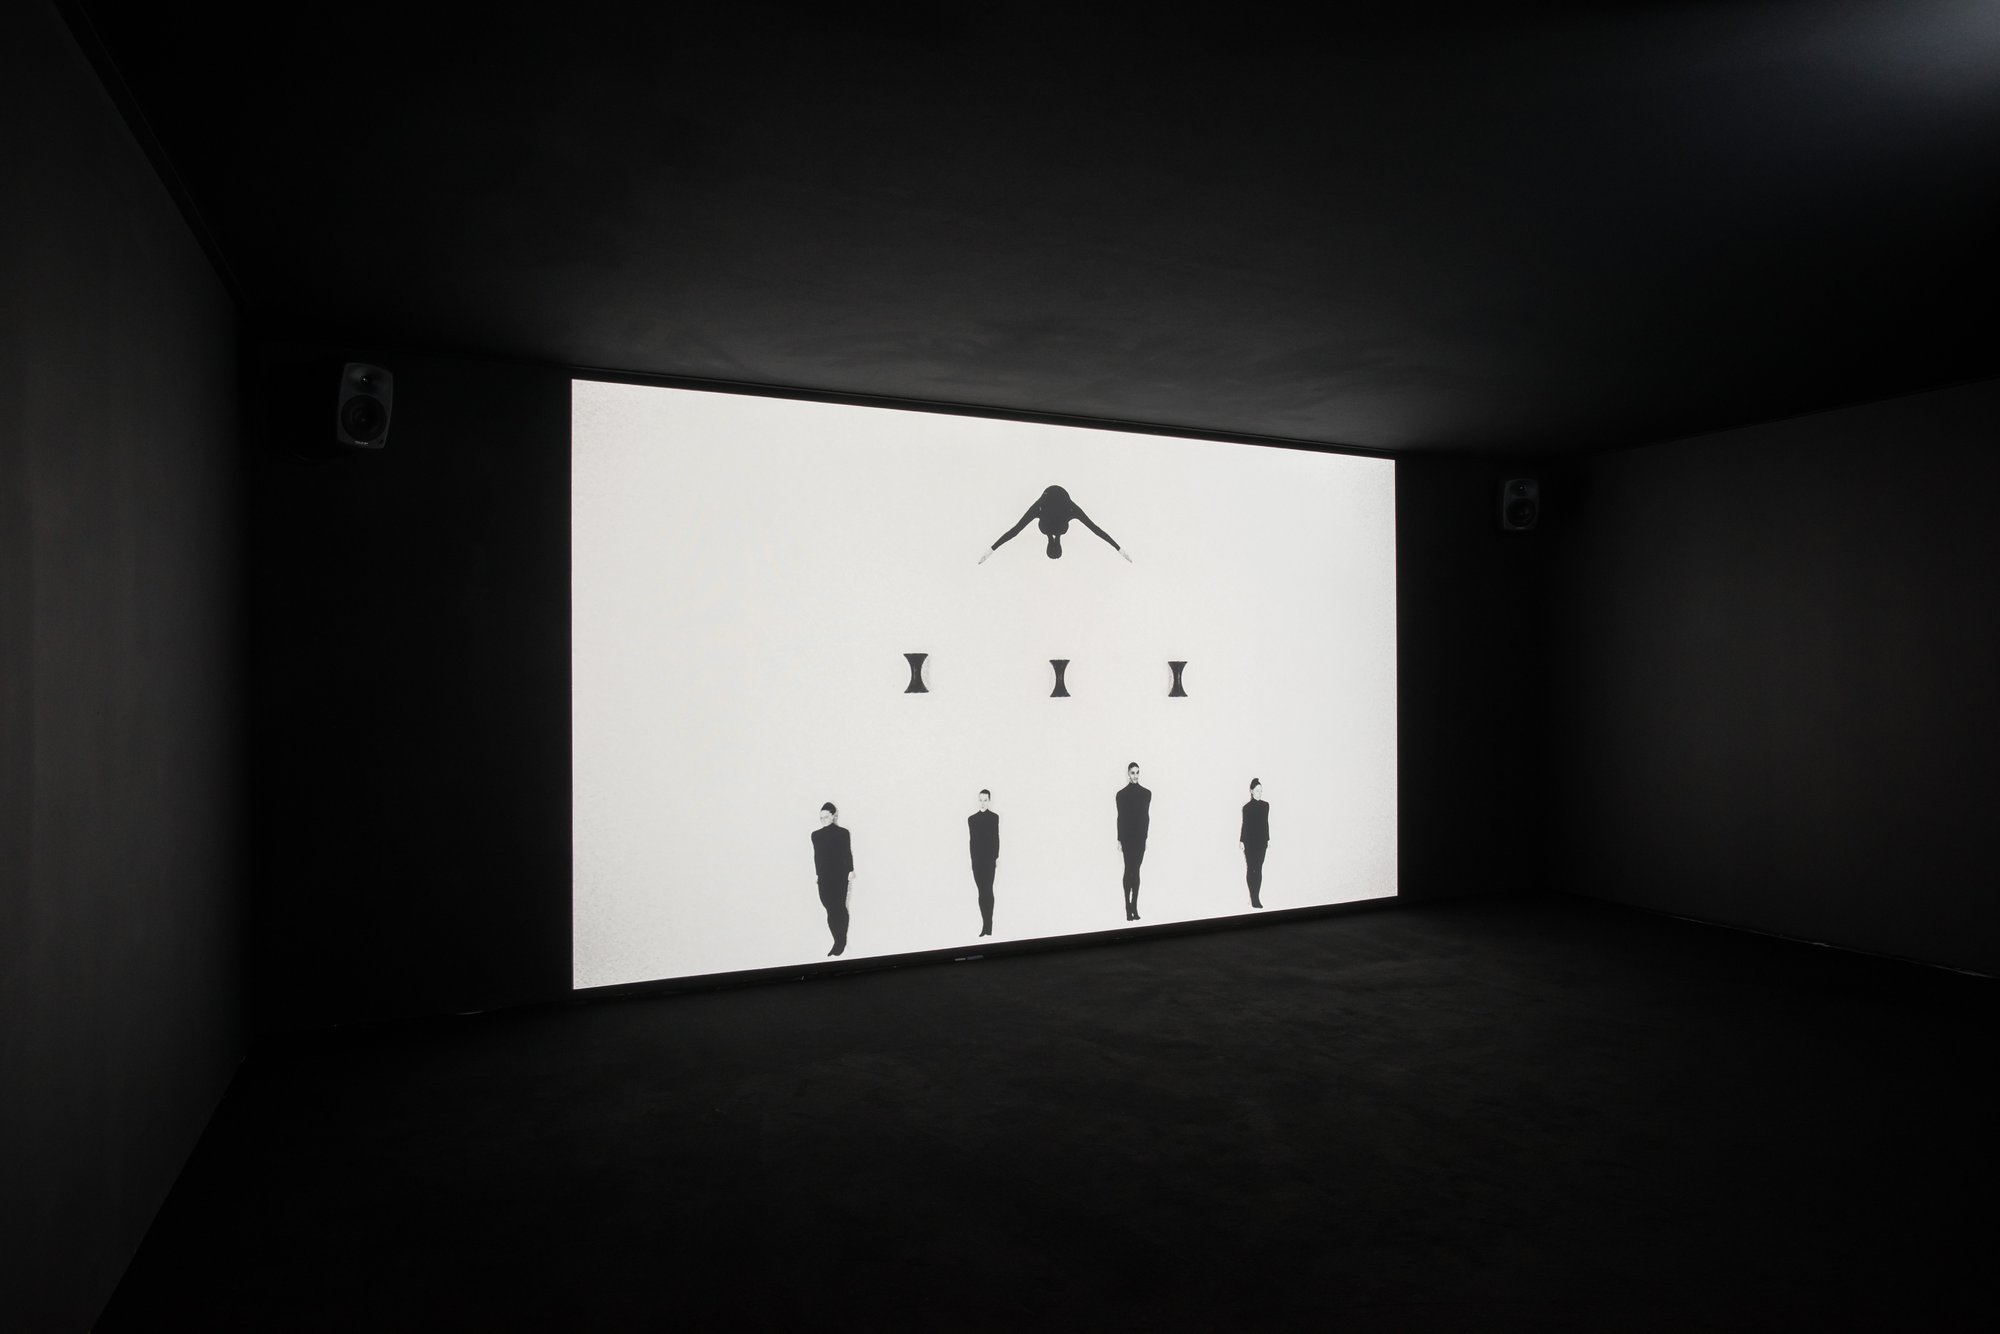 Duncan Campbell, It for Others, 16 mm film and analogue video transferred to digital video, 2013. Installation view, Michael Clark: Cosmic Dancer, Barbican Centre, London, 2020